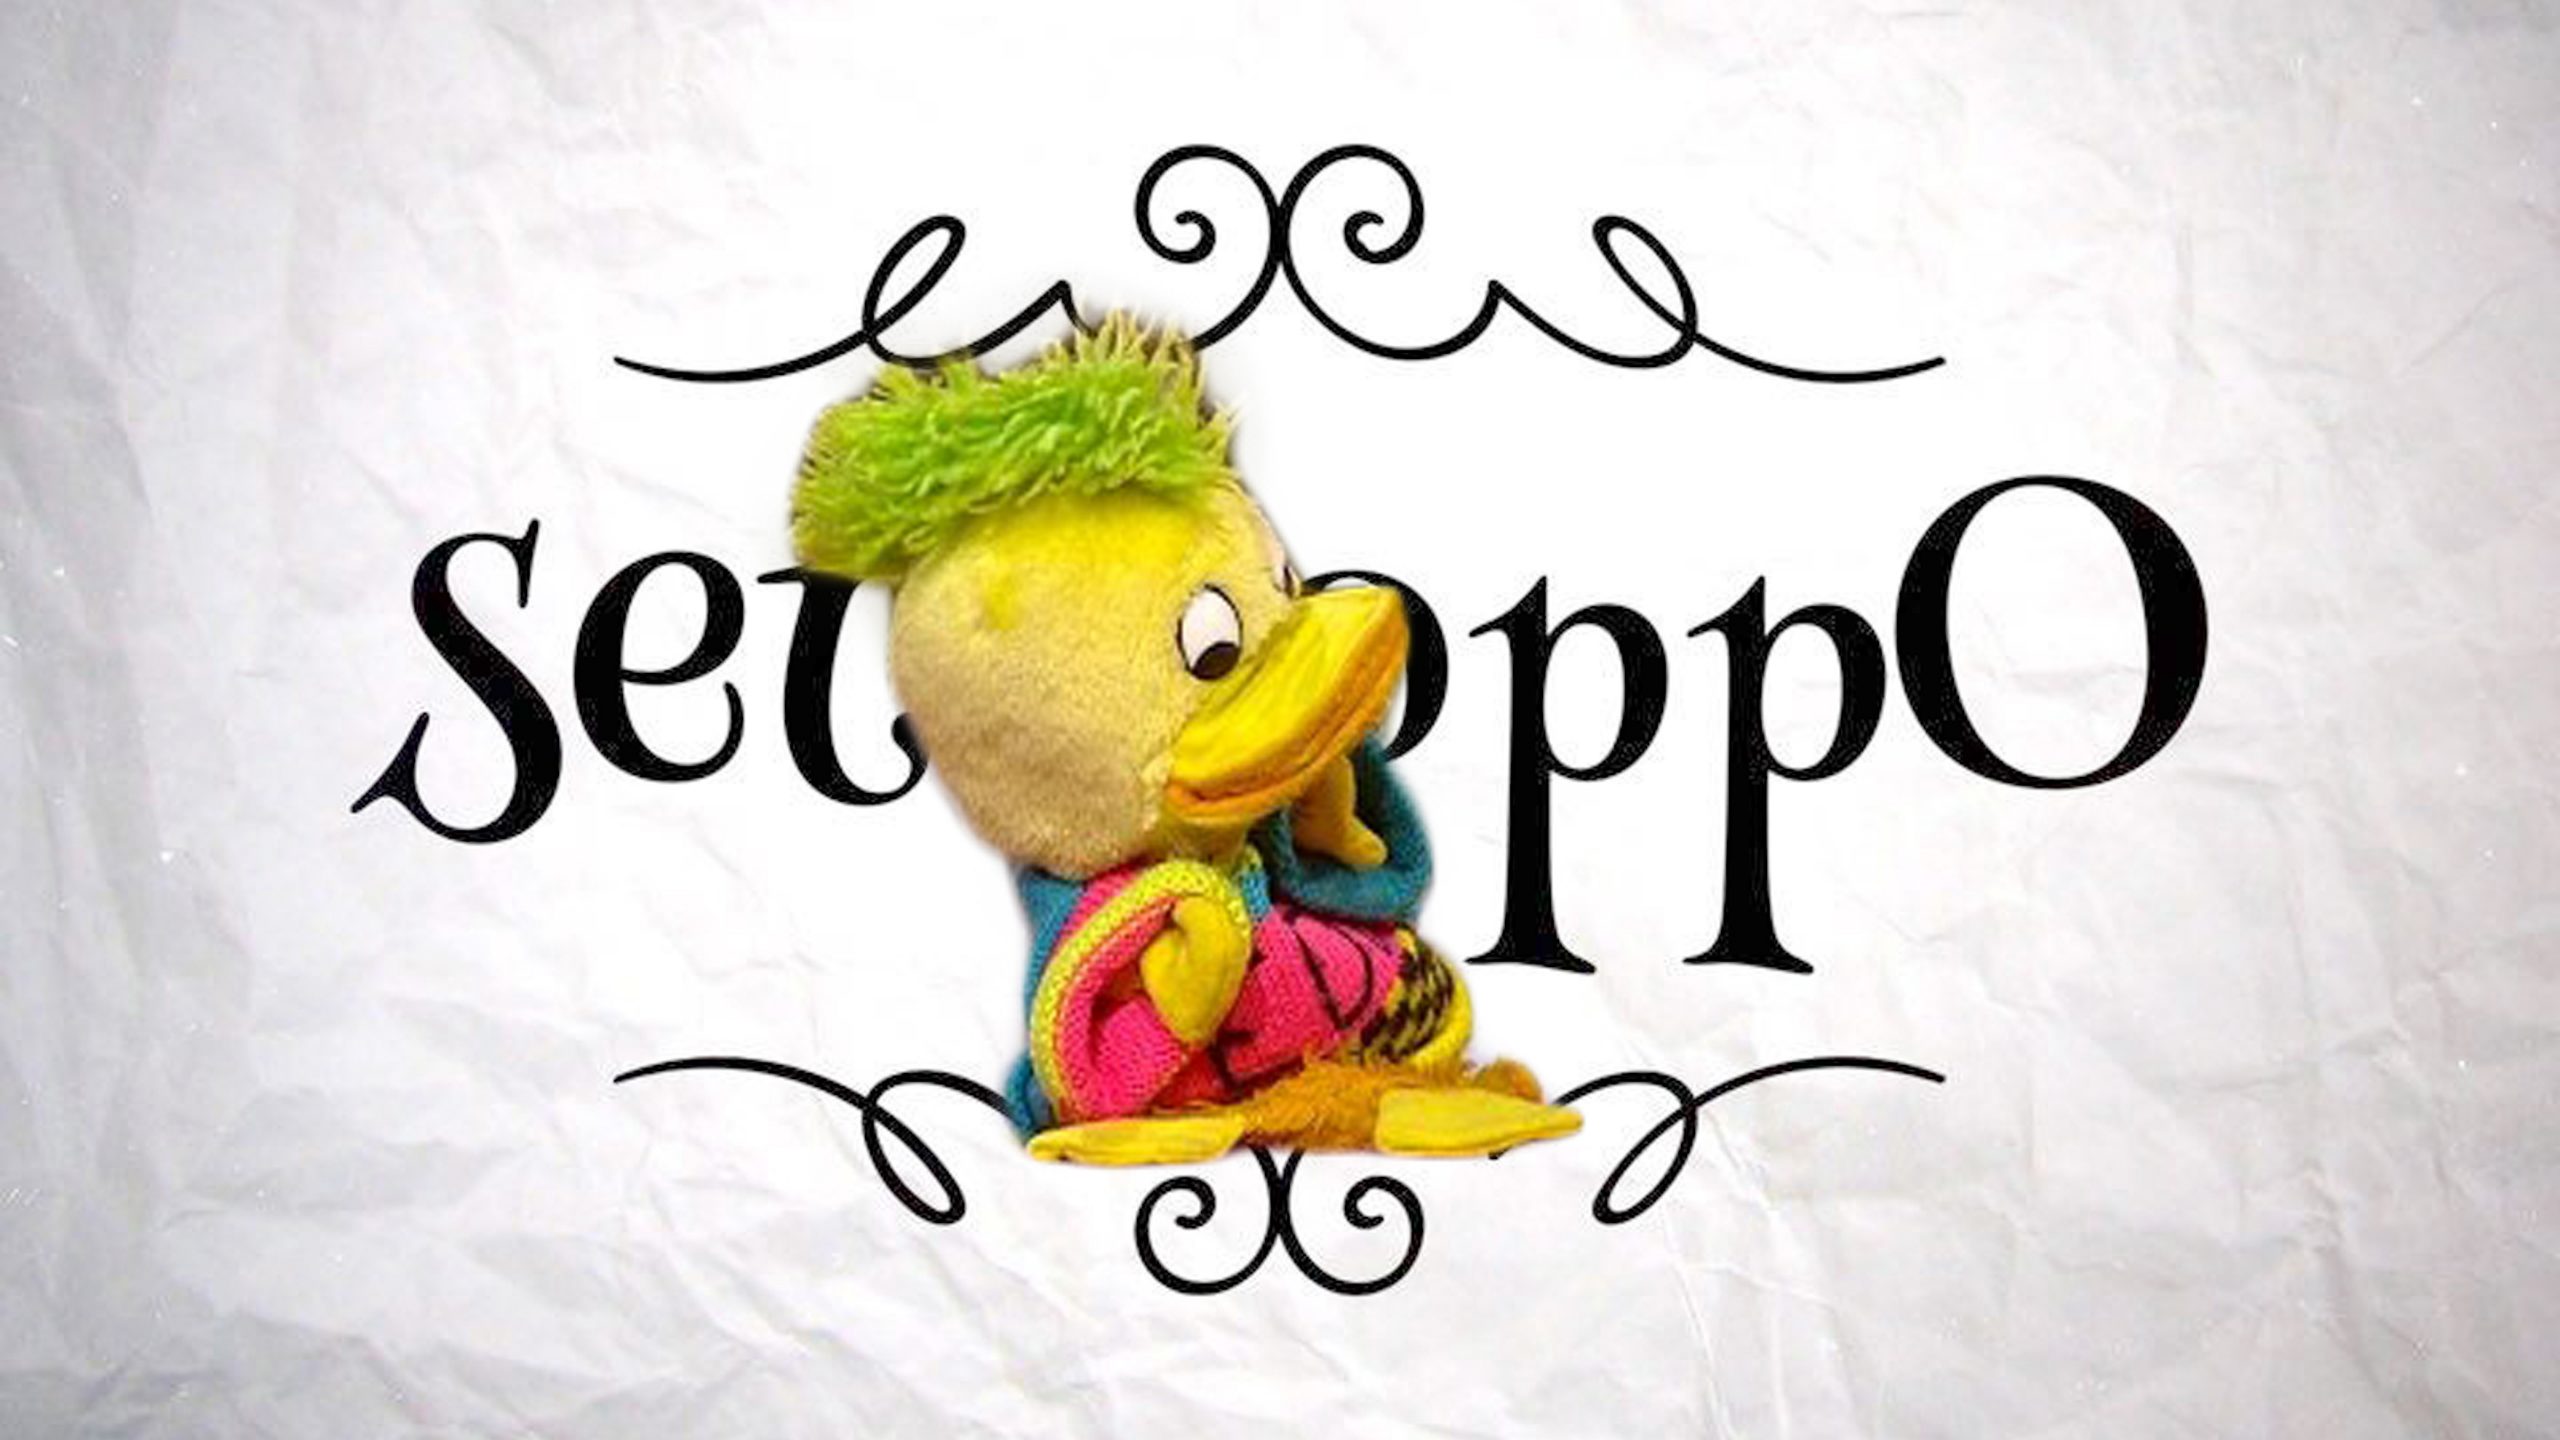 What’s The Opposite Of Edd The Duck?